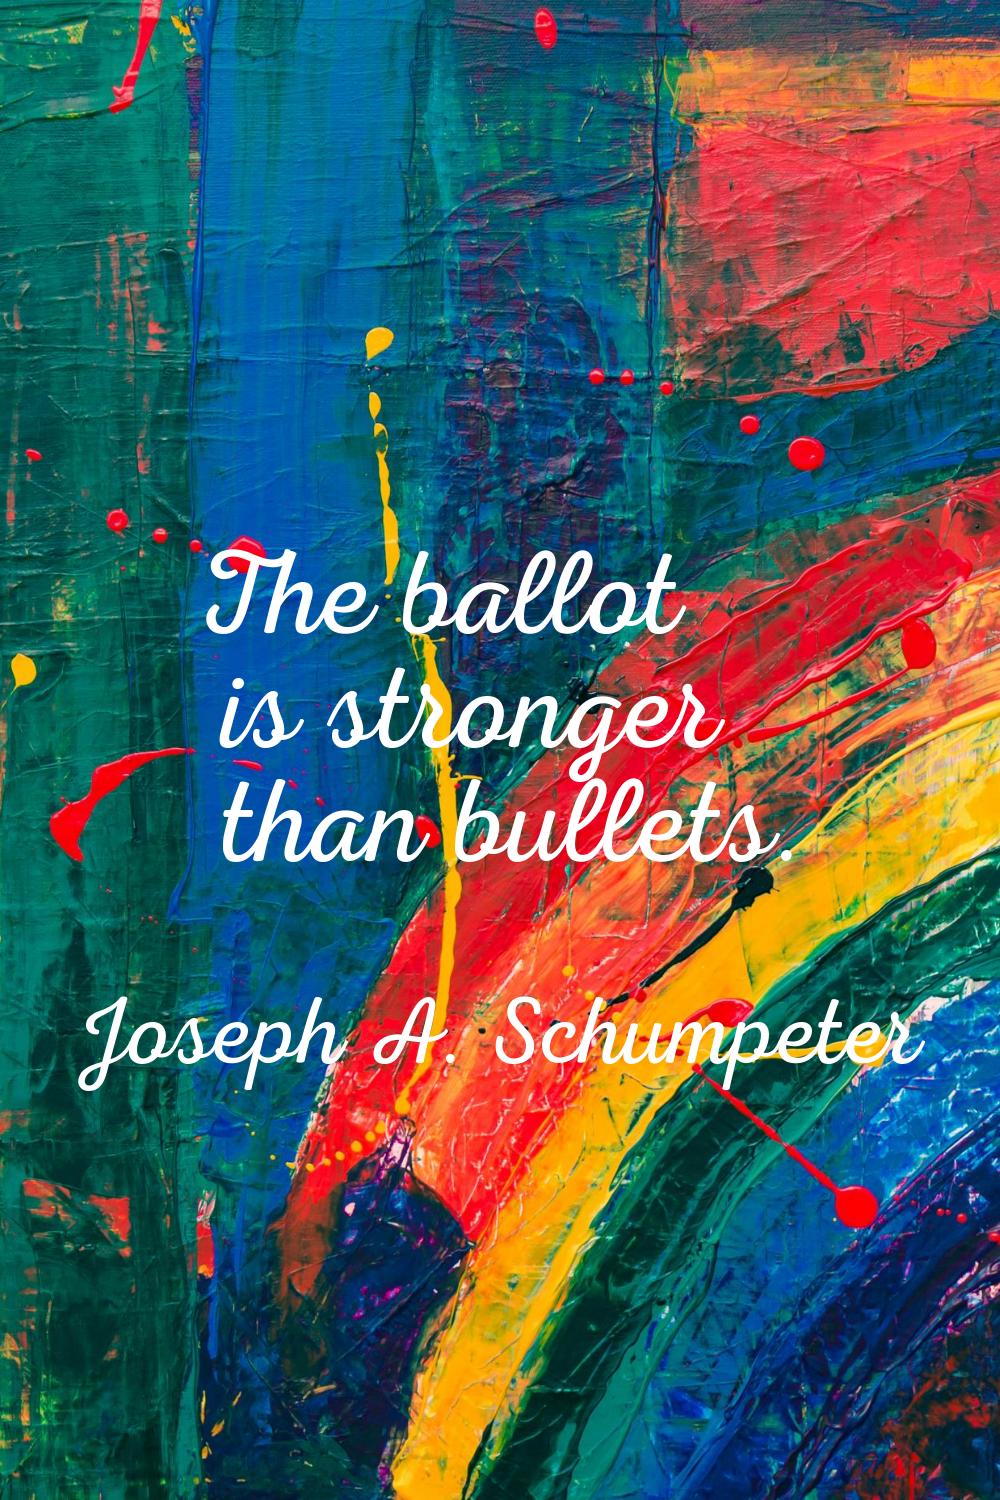 The ballot is stronger than bullets.